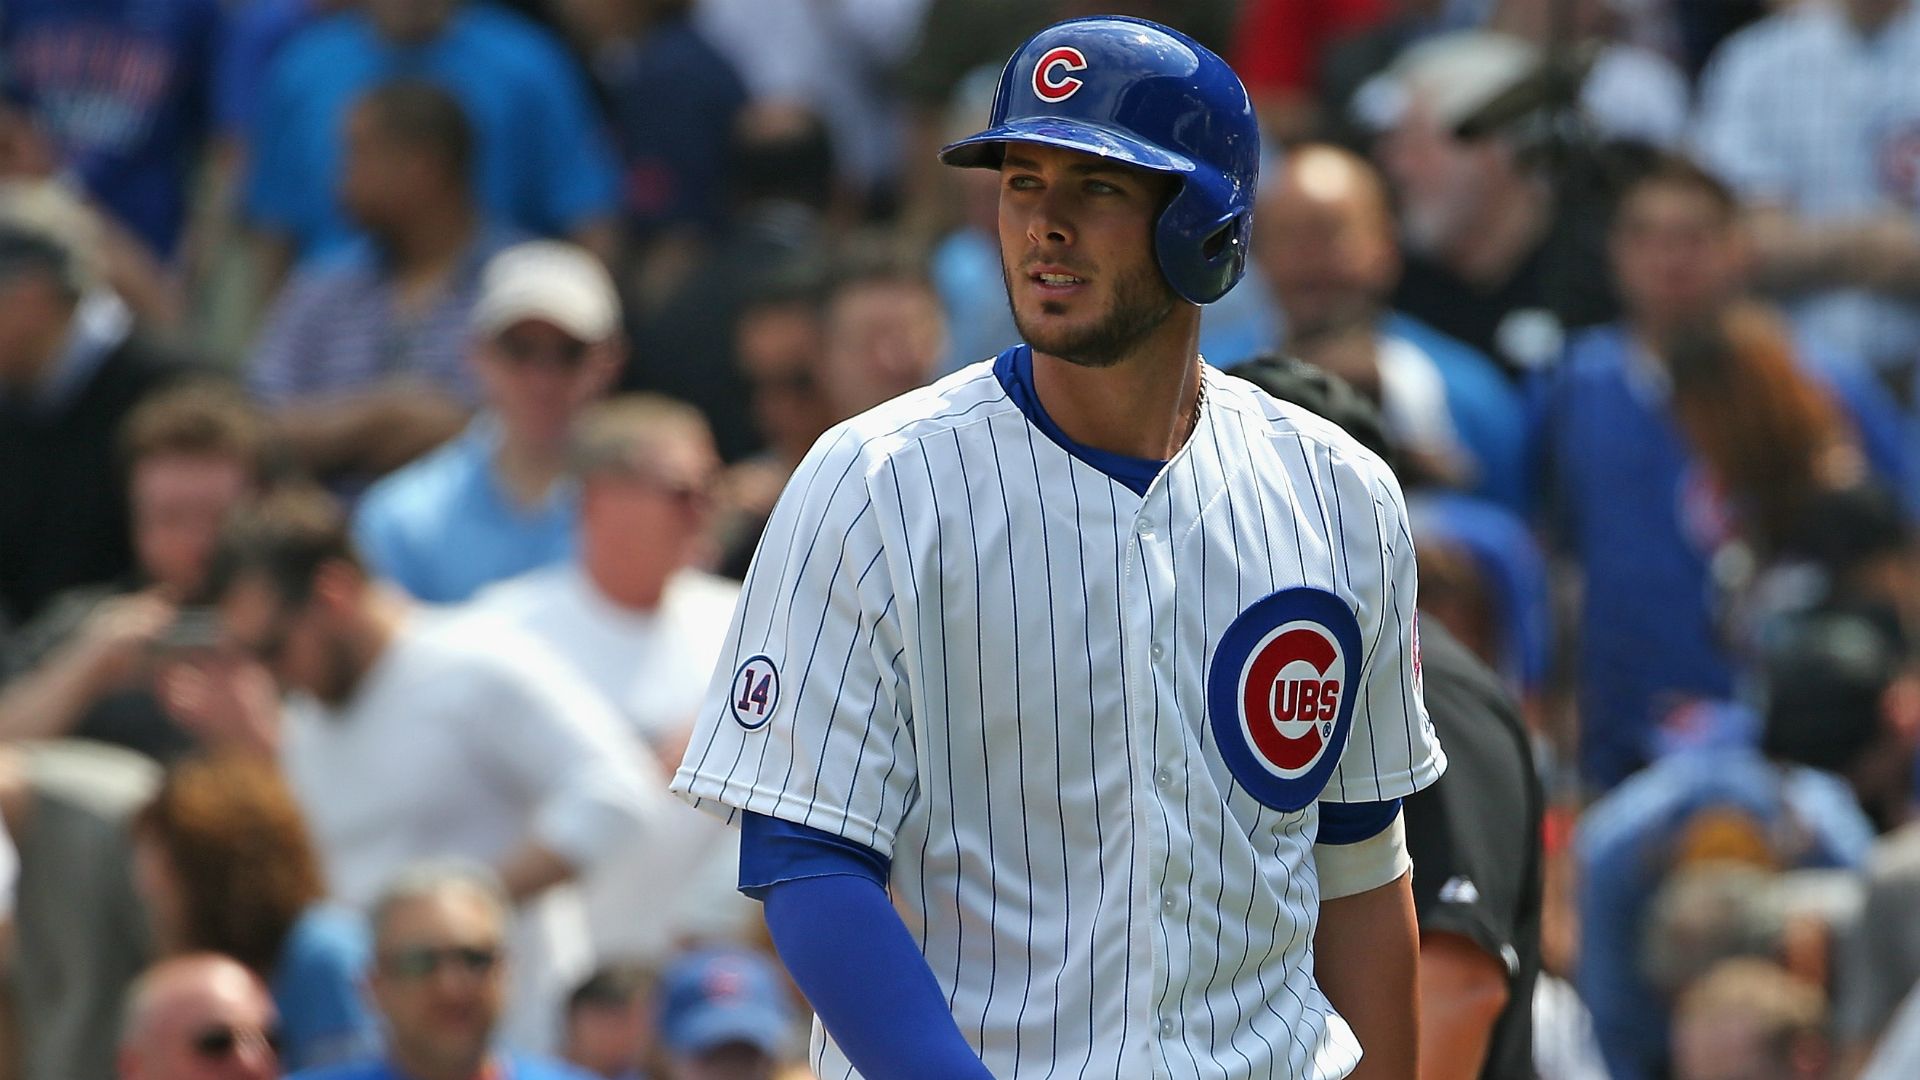 Kris Bryant Wallpapers posted by Ethan Sellers.